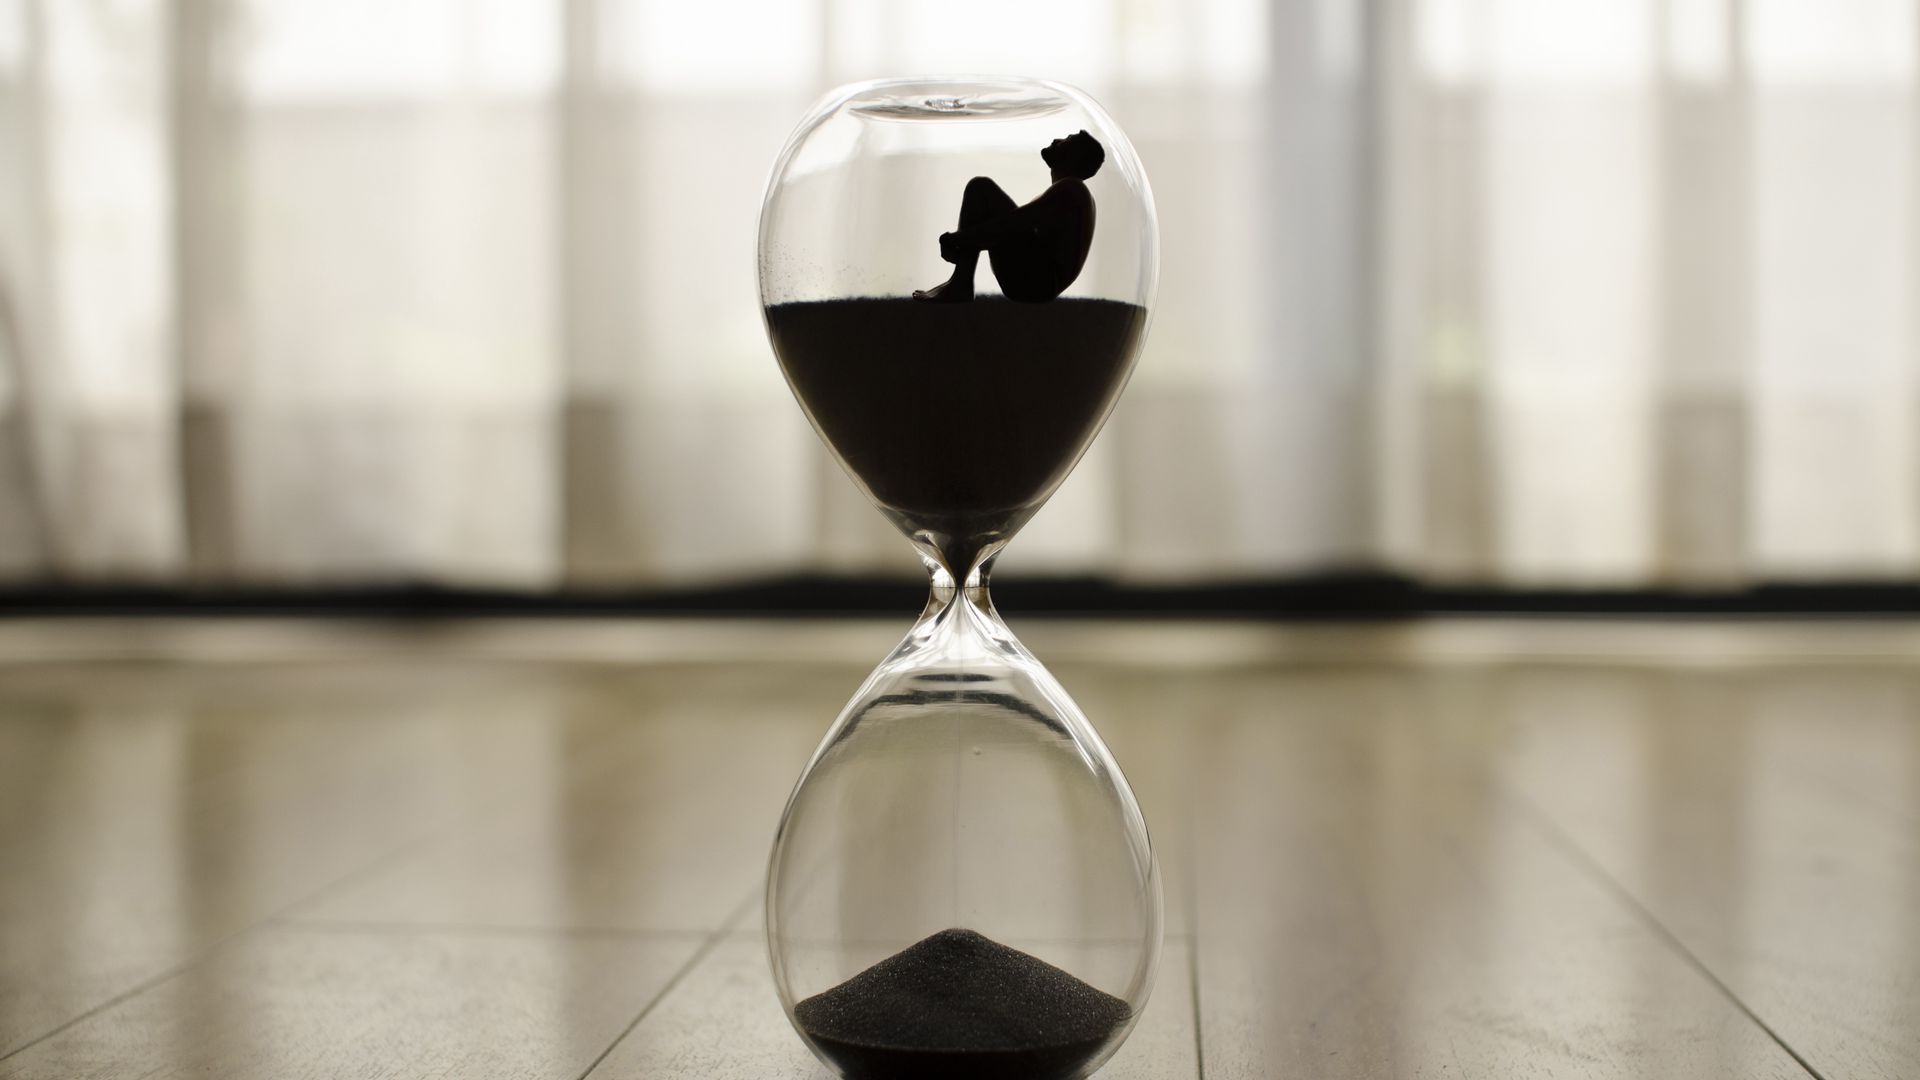 Download wallpaper 1920x1080 hourglass, man, time, loneliness full hd,  hdtv, fhd, 1080p hd background